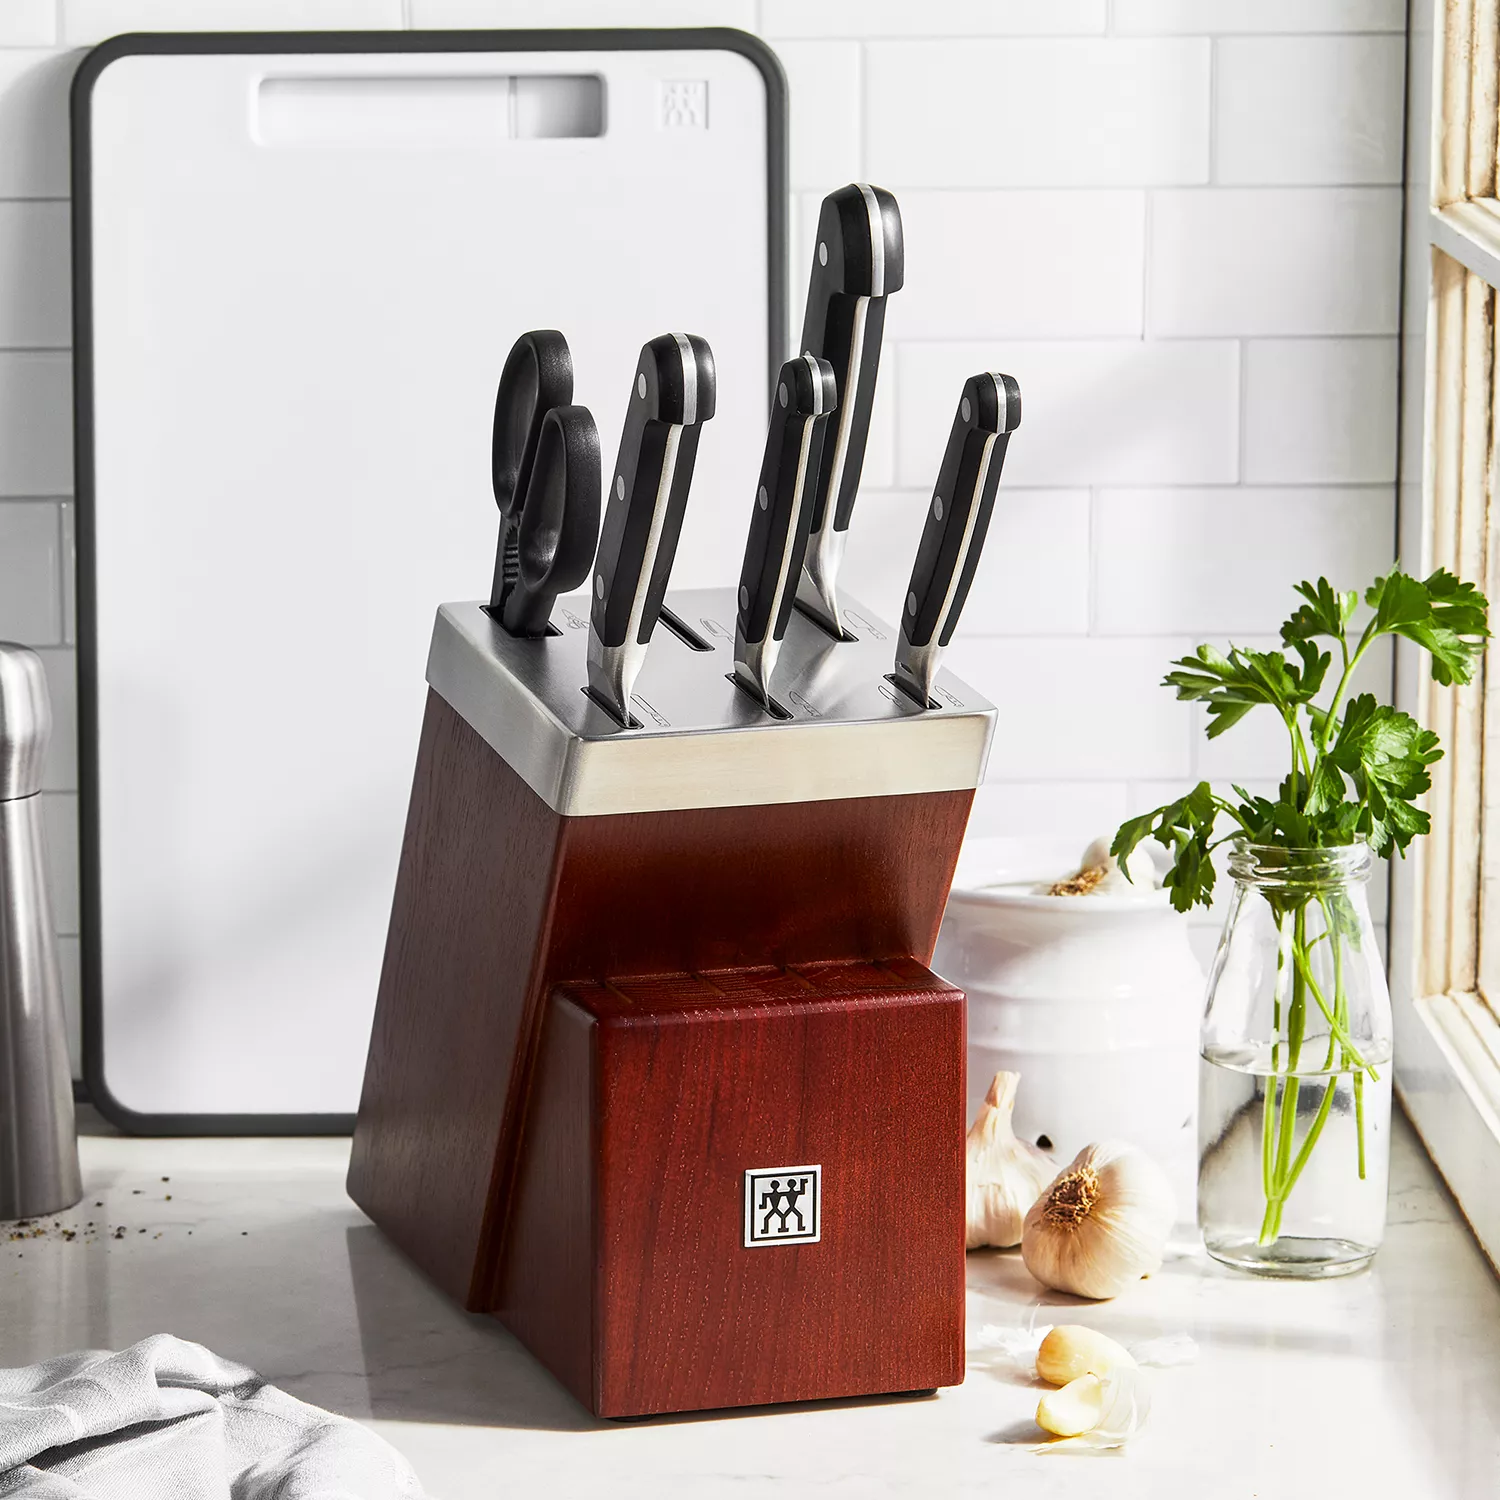 ZWILLING Four Star 5-pc Compact Self-Sharpening Knife Block Set - Black